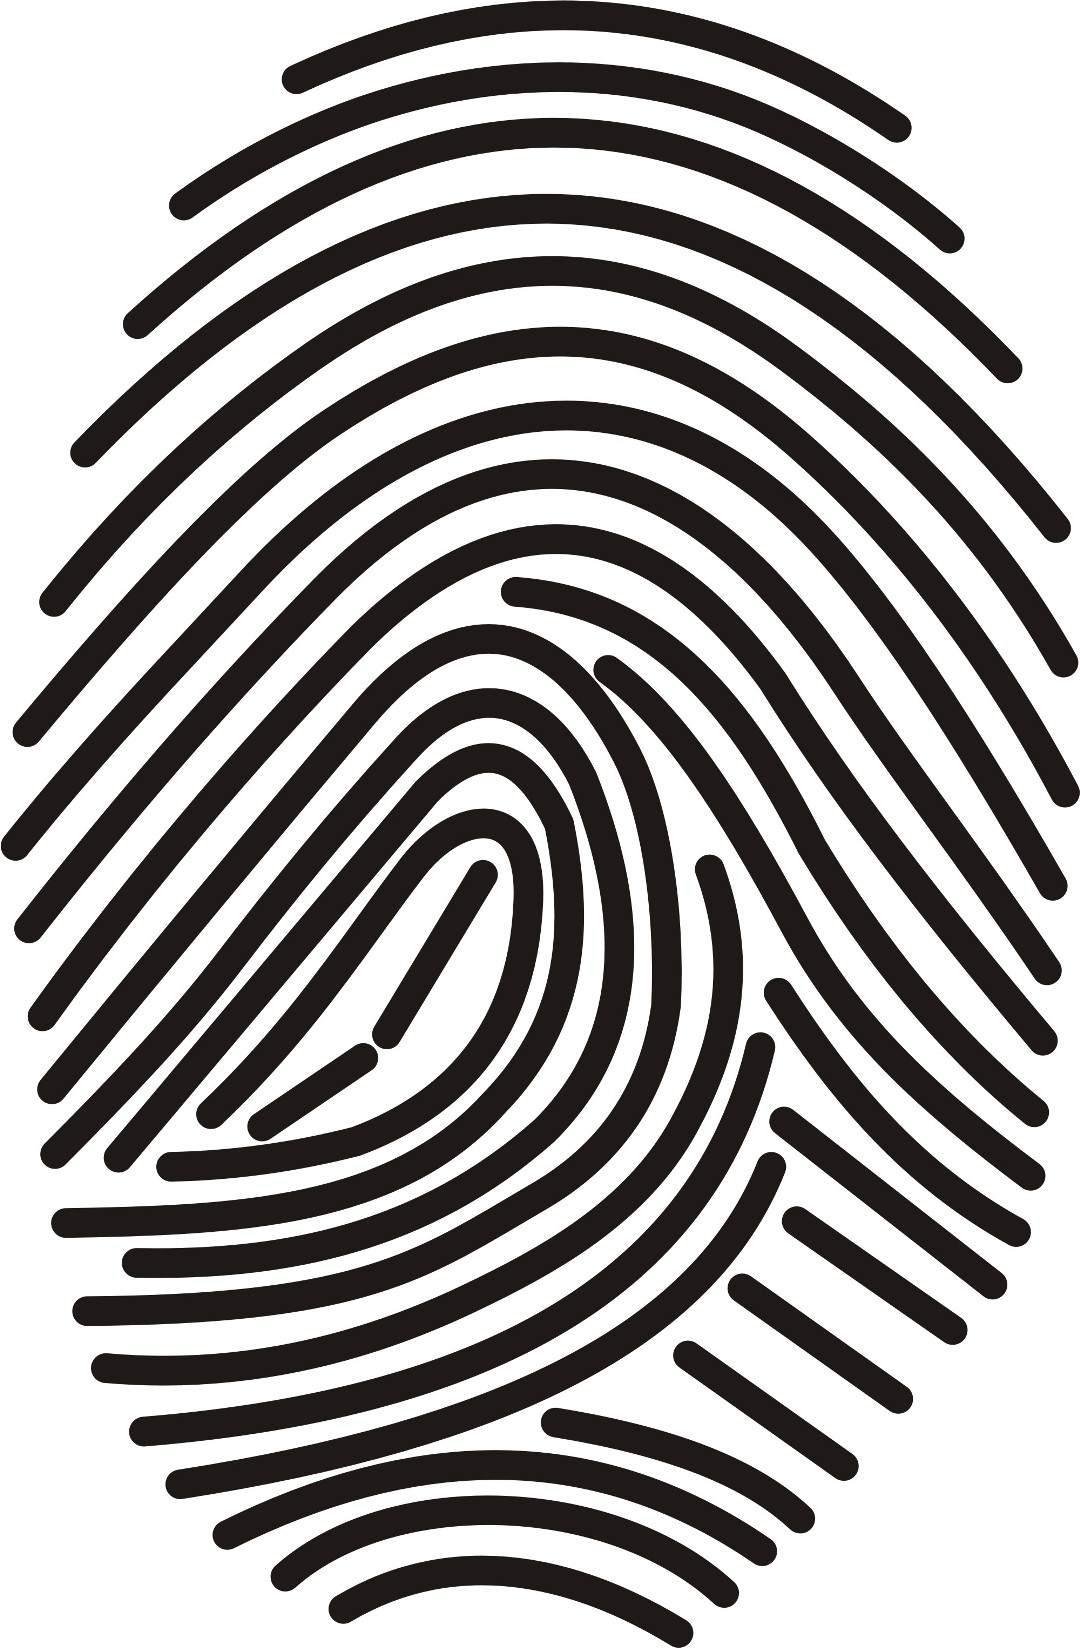 Why Apple's use of Fingerprint Biometrics is Boon to Industry, not the